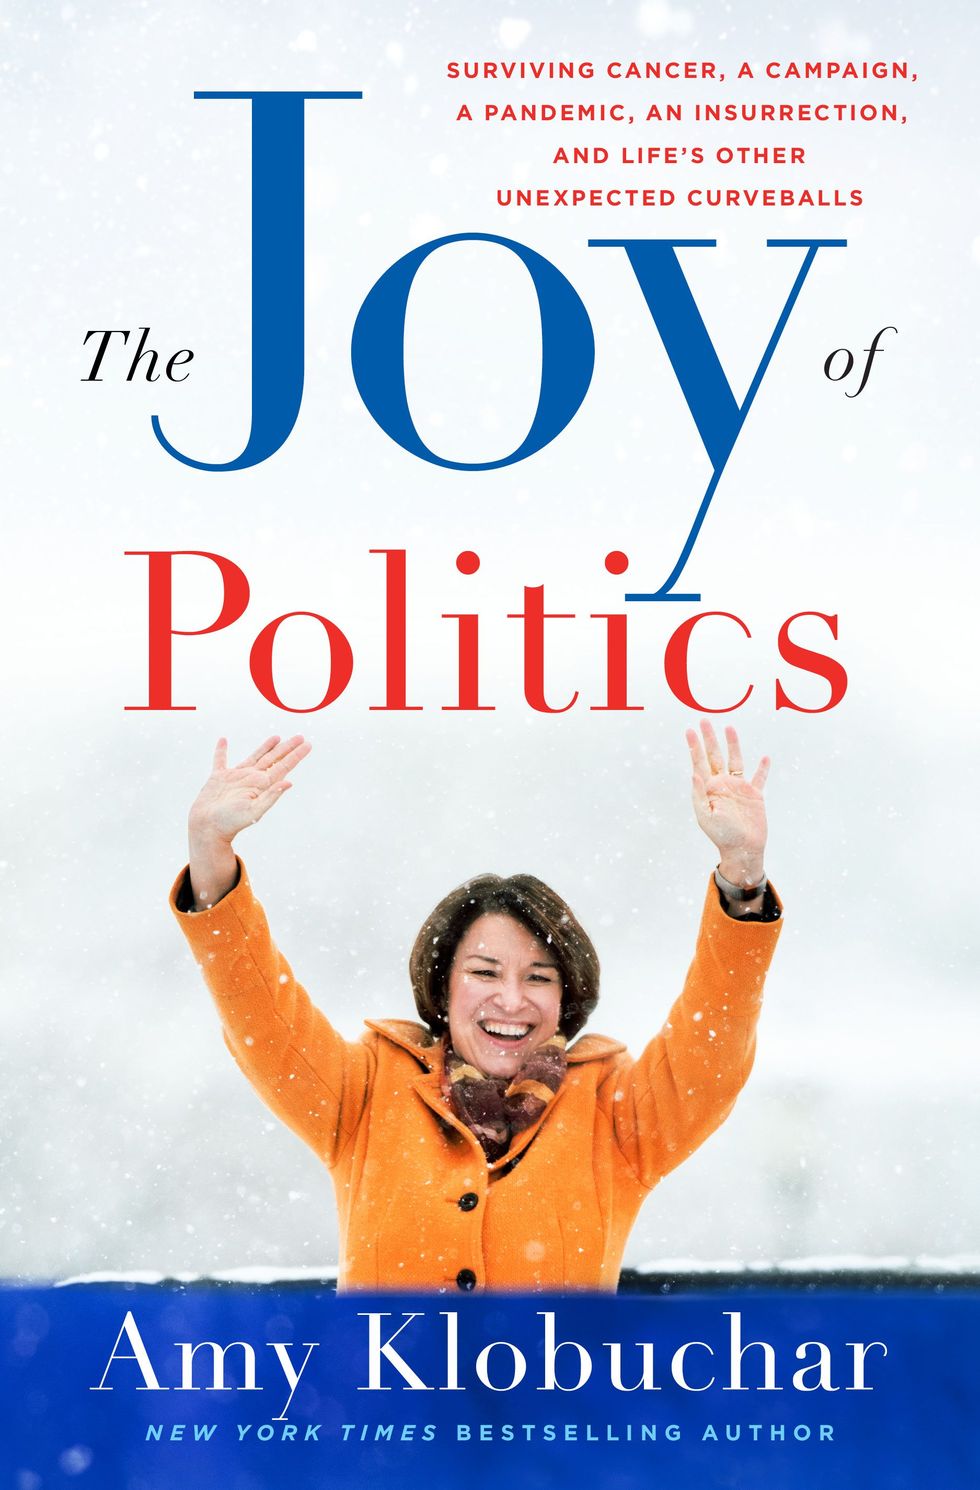 <i>The Joy of Politics: Surviving Cancer, a Campaign, a Pandemic, an Insurrection, and Life’s Other Unexpected Curveballs</i>